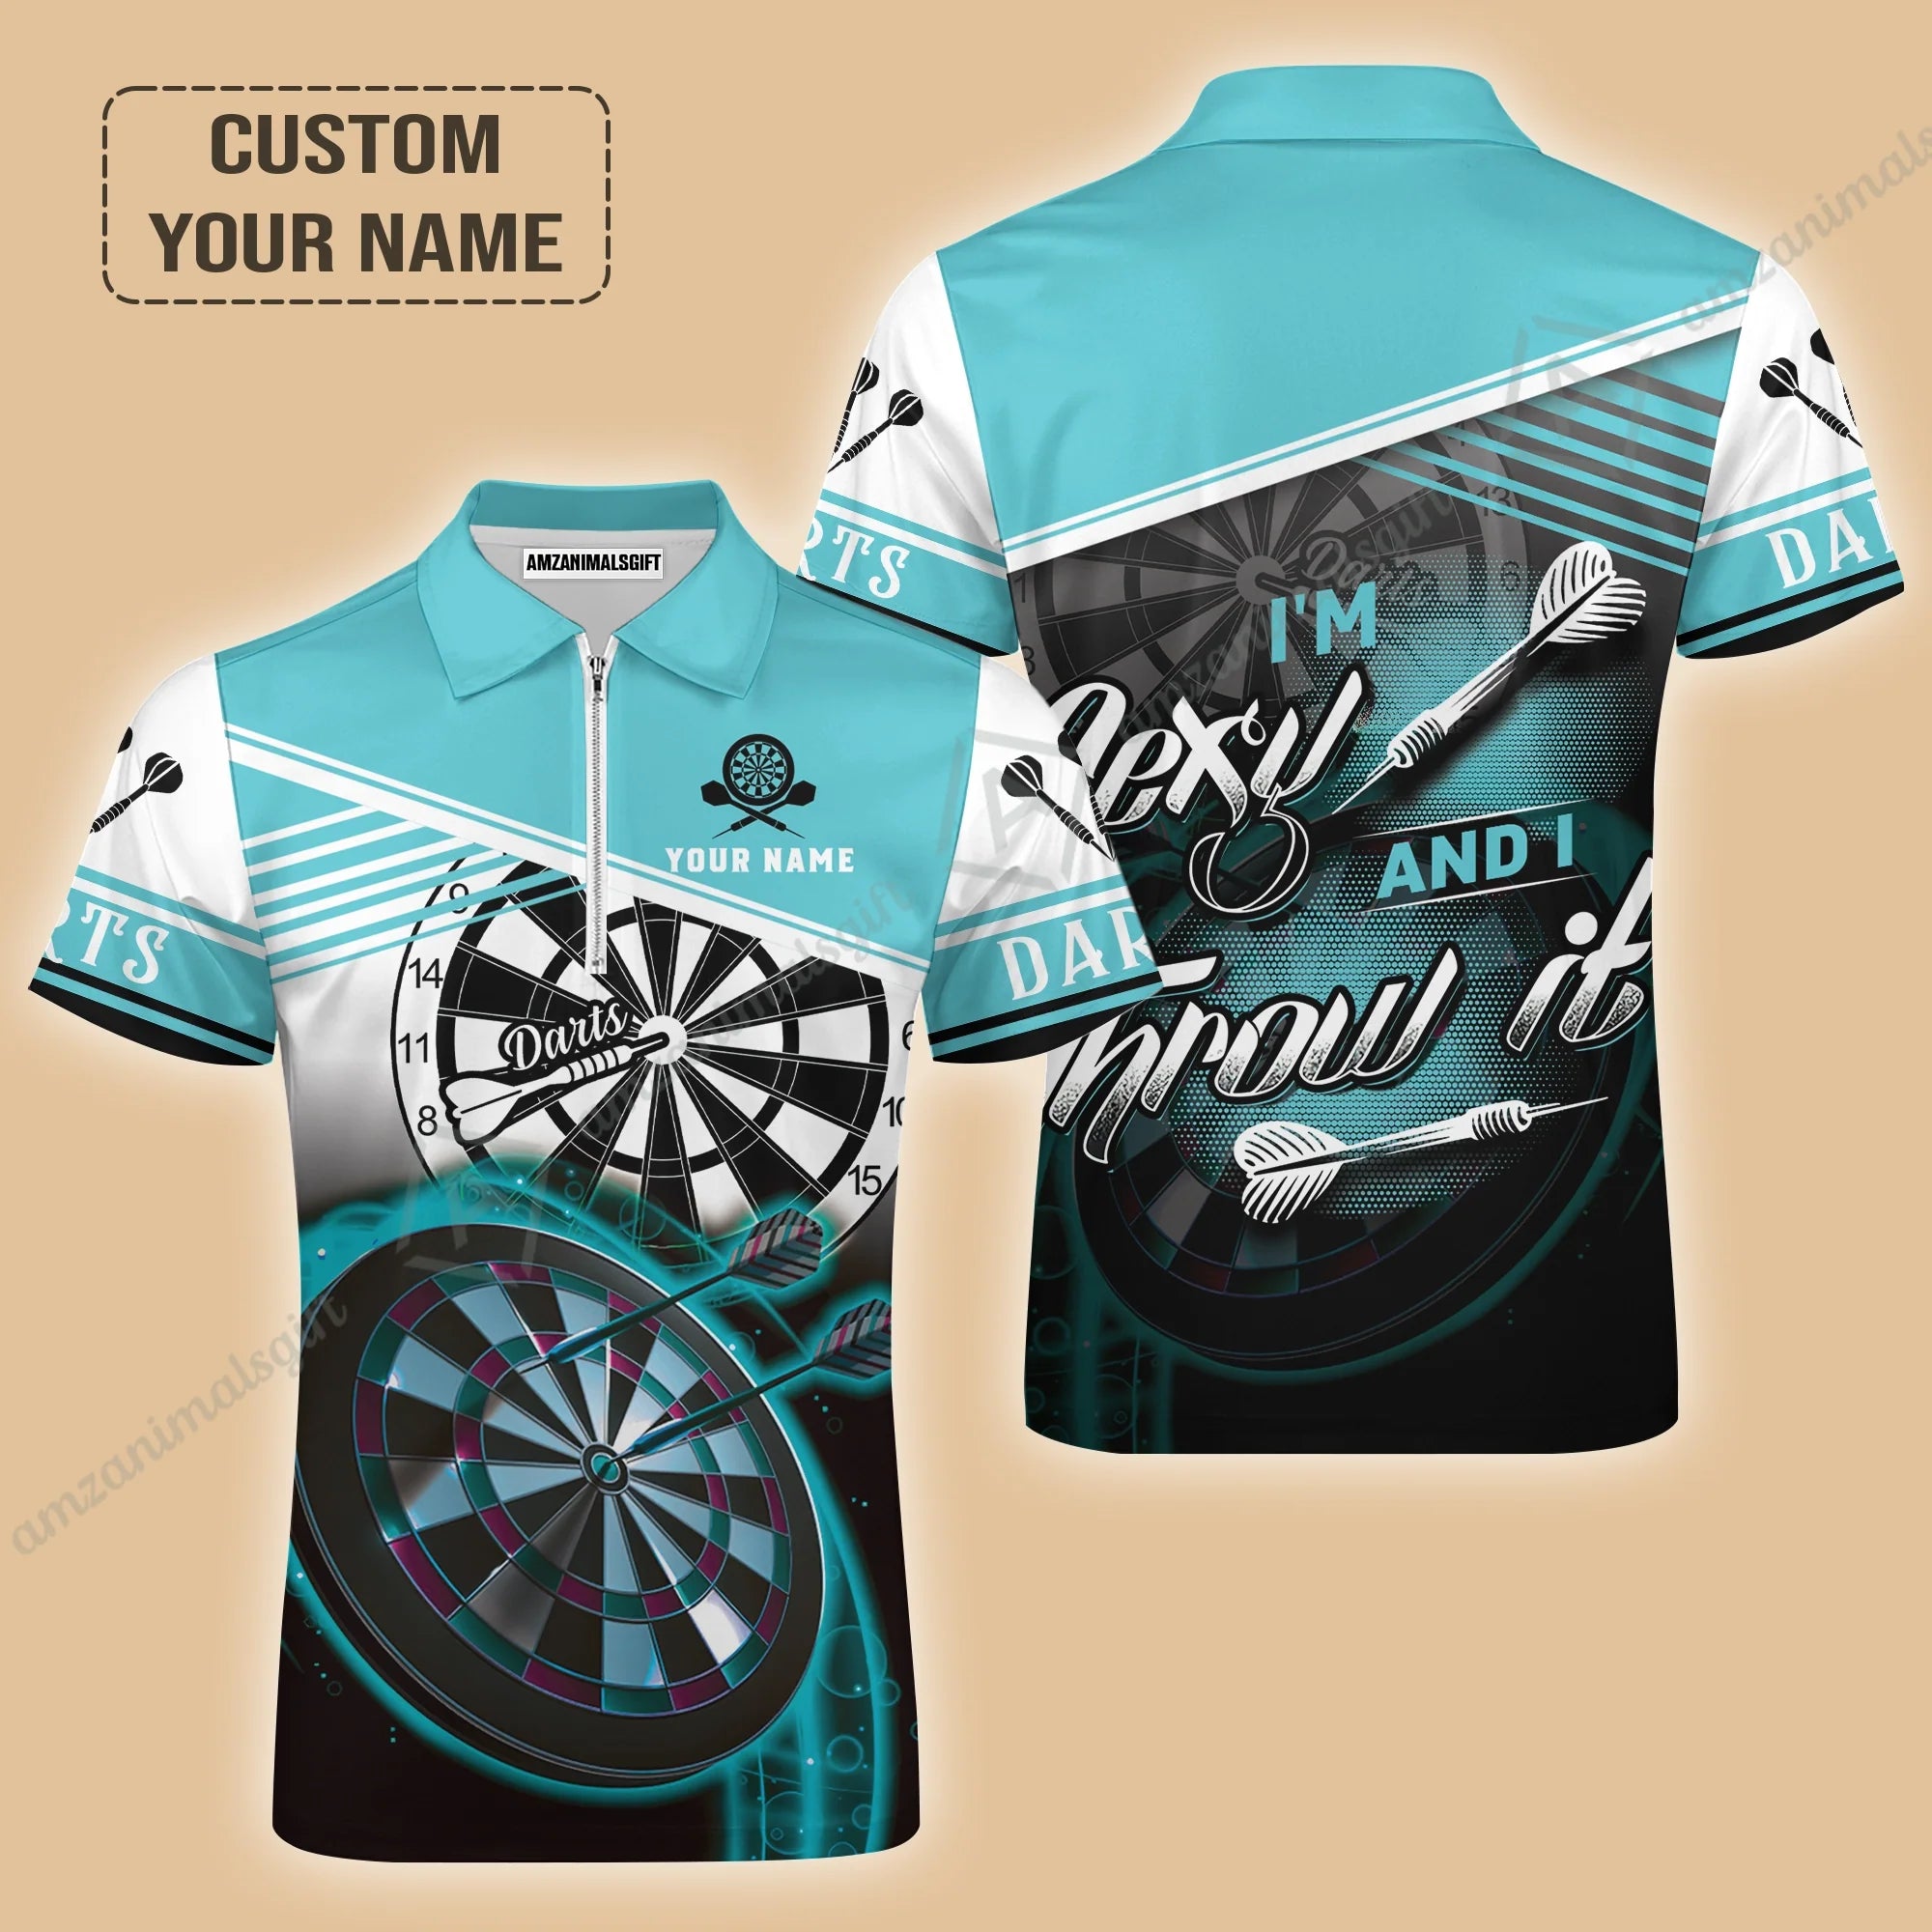 Personalized Darts Hoodie, Darts Cyan Color Customized Shirt I'm Sexy And I Throw It, Outfits For Darts Players, Darts Team